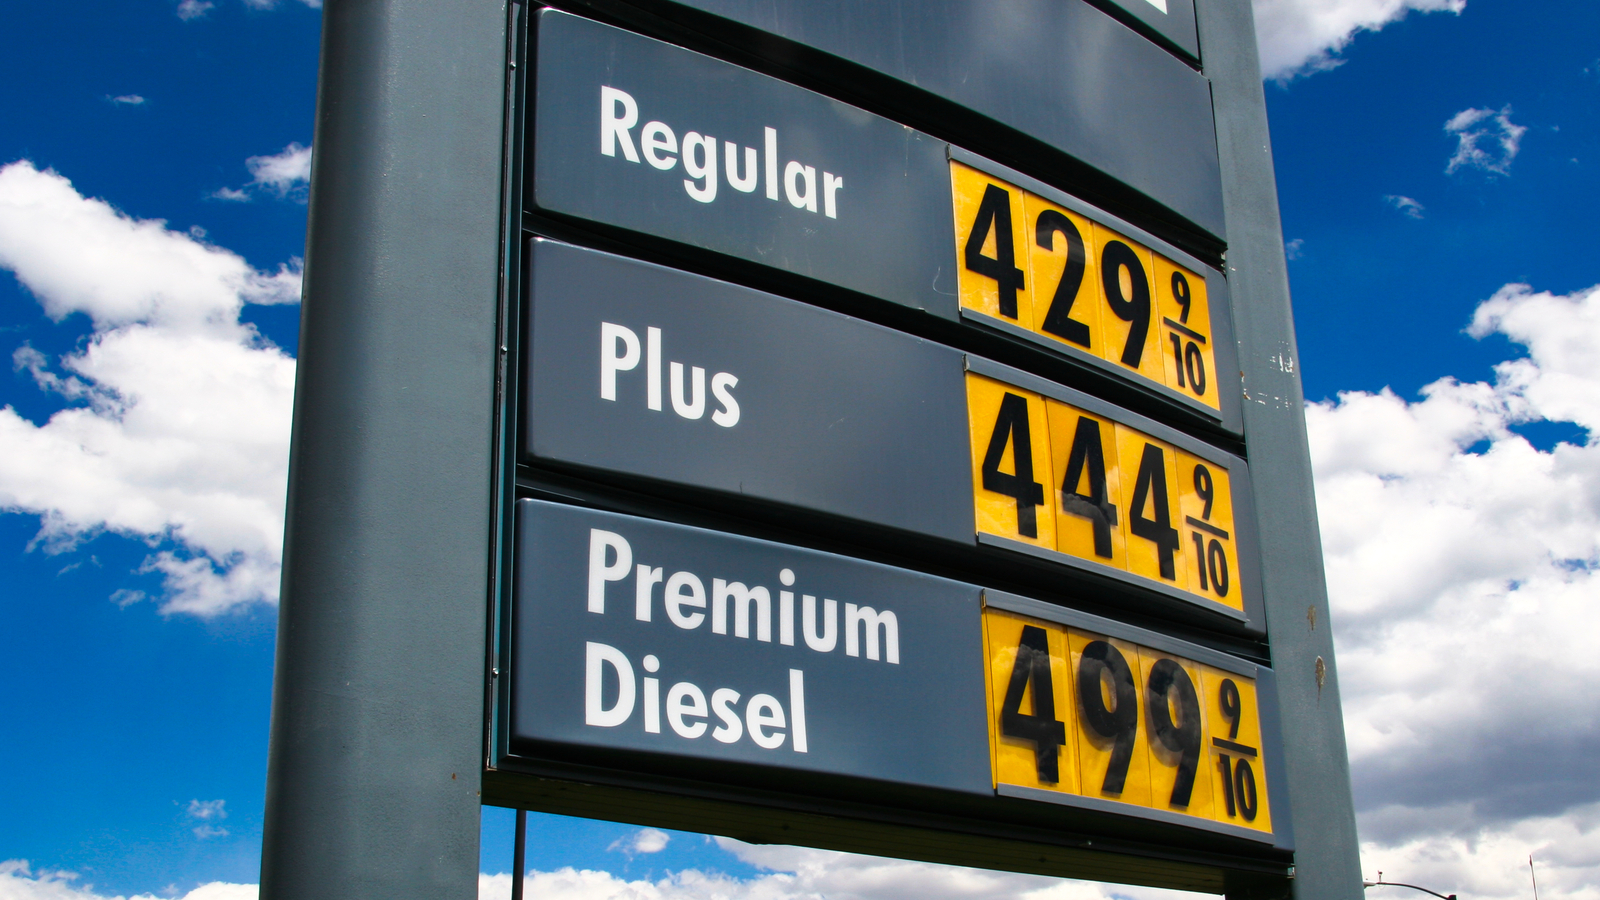 High gas prices in the U.S. President Biden is considering a gas tax holiday.